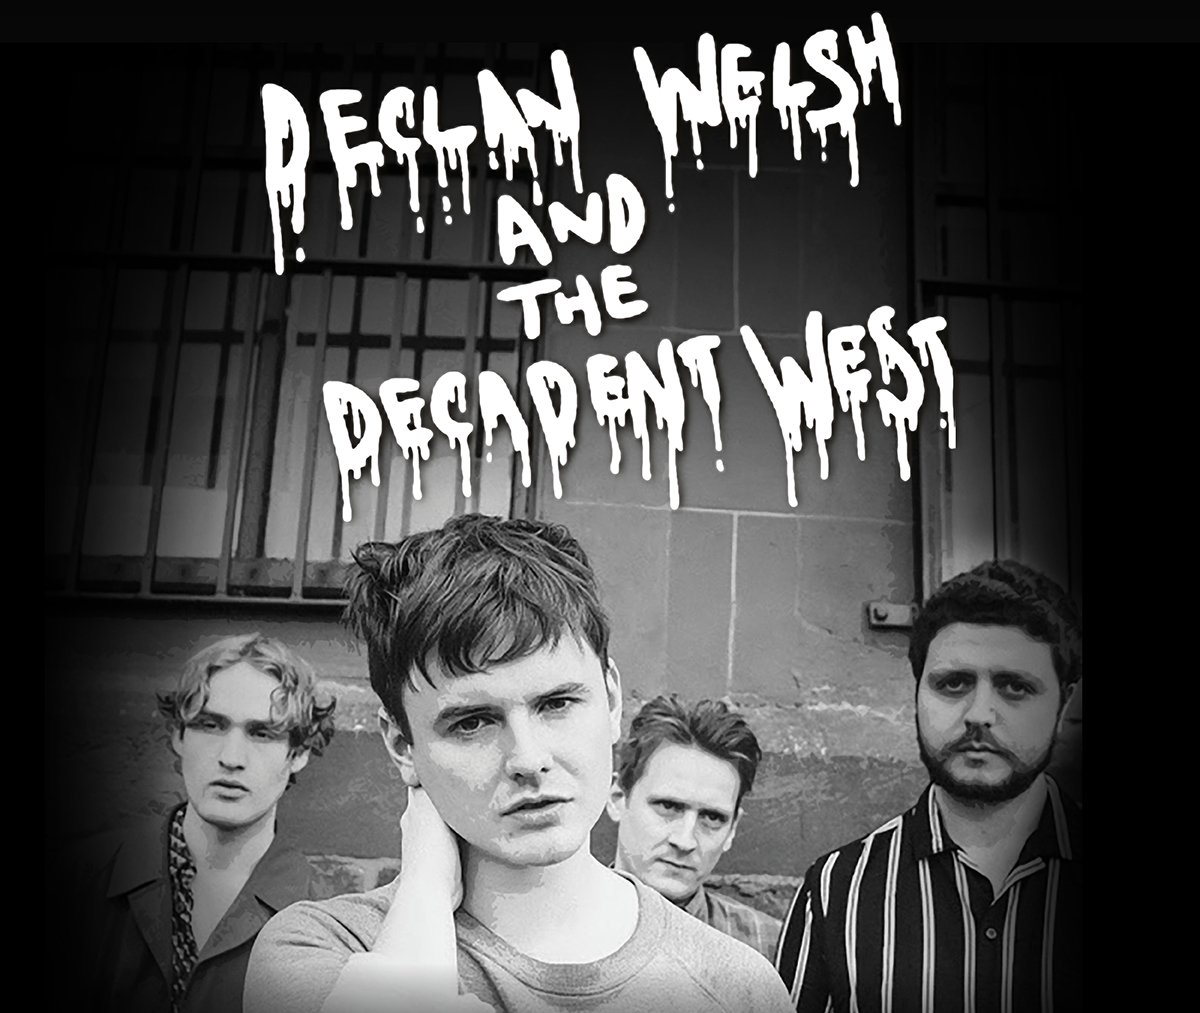 News – Declan Welsh and The Decadent West – Aw The Time